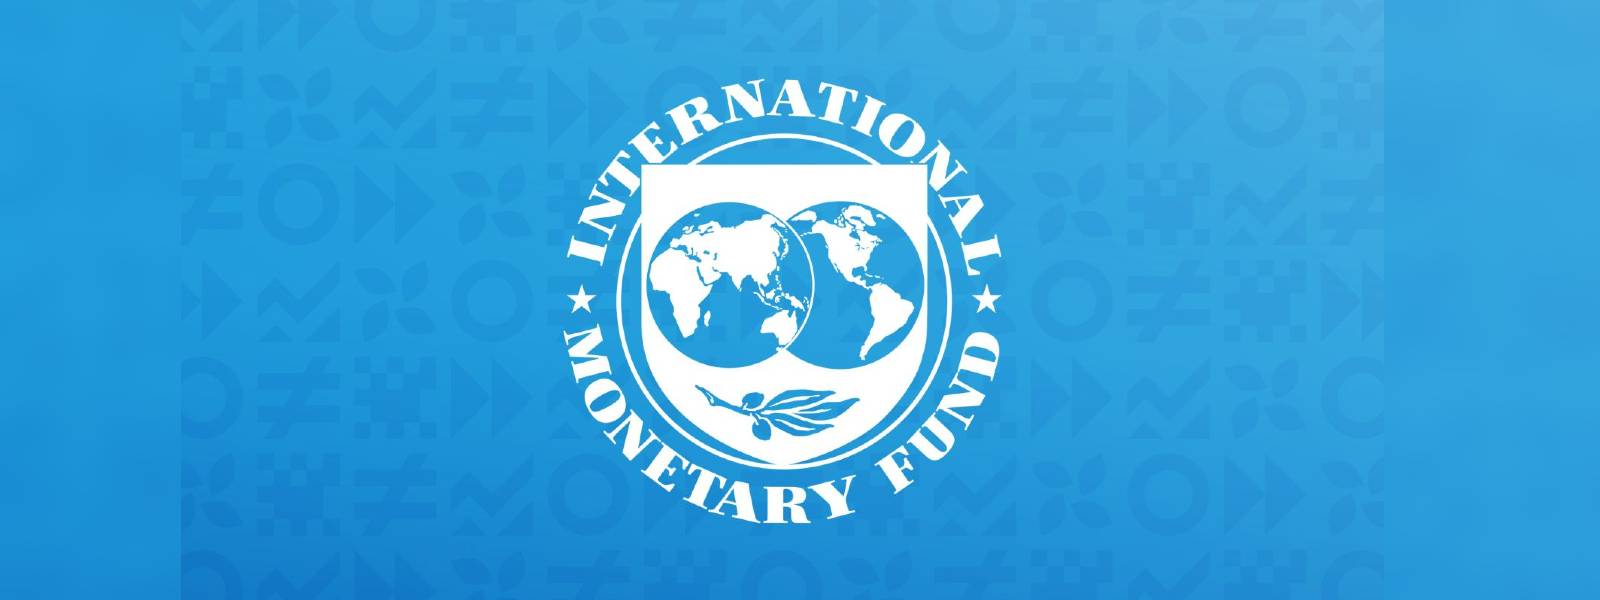 The importance of understanding the role of the IMF